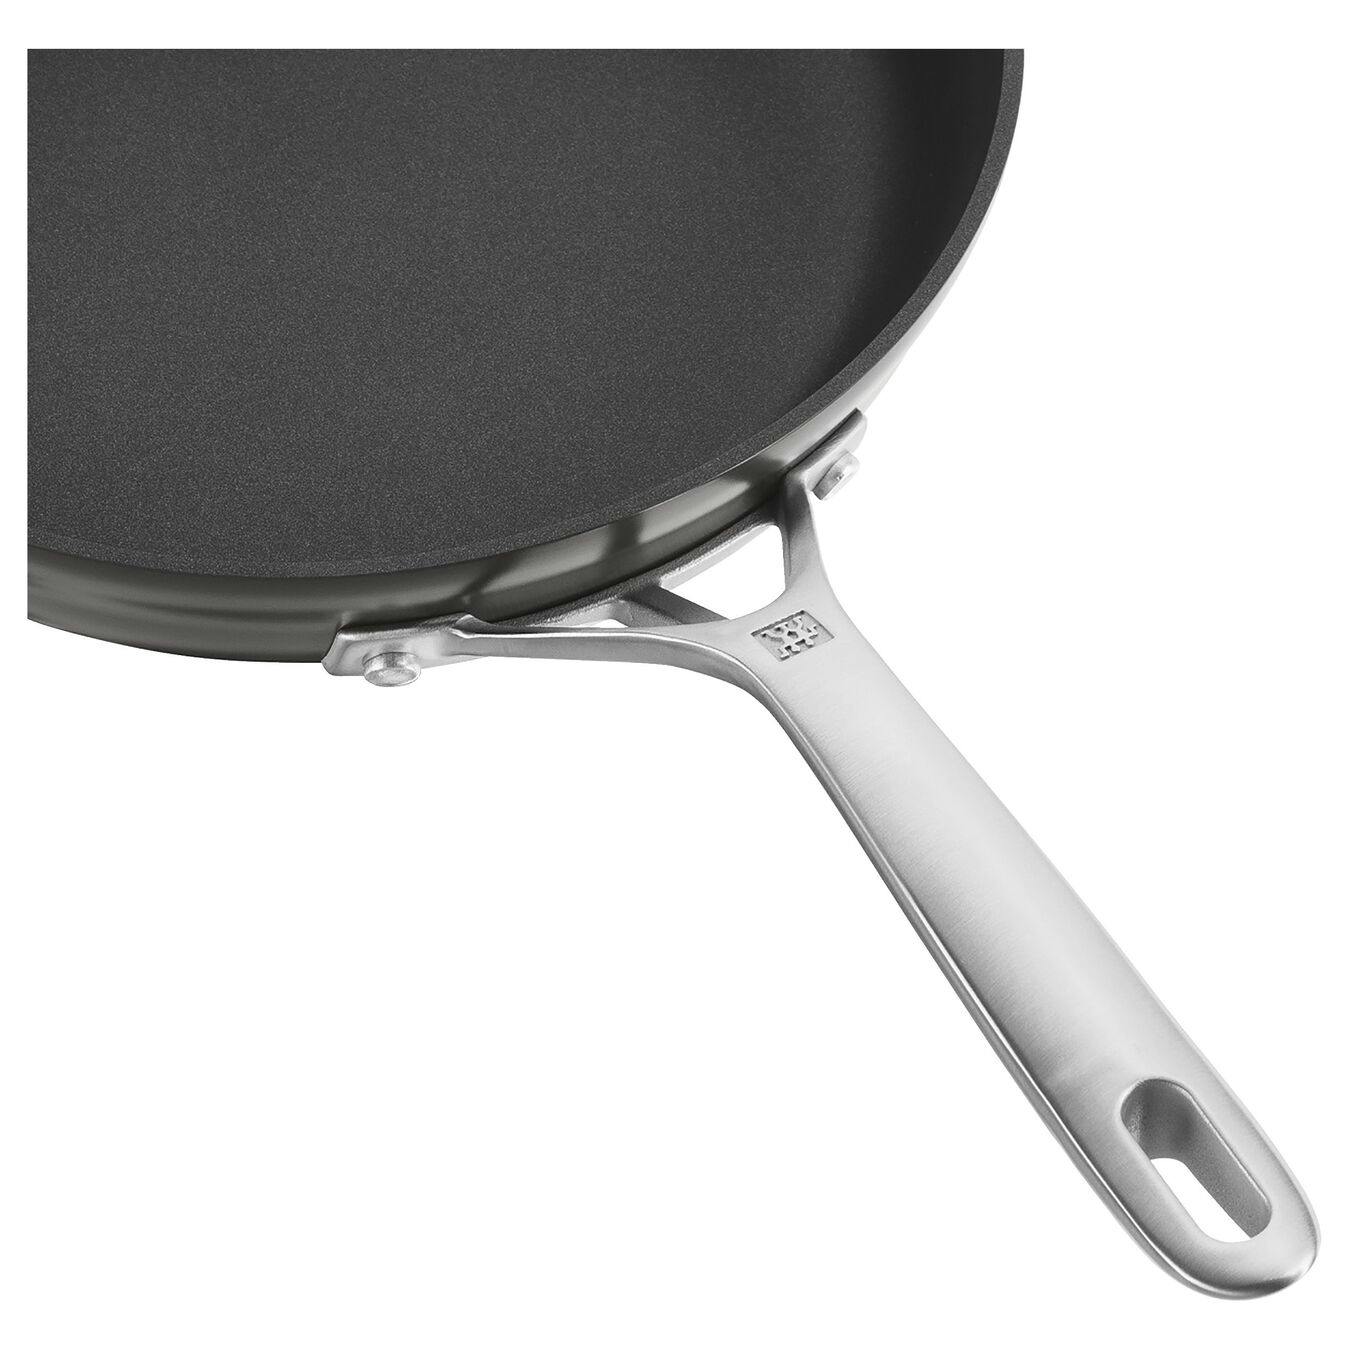 Zwilling Motion Nonstick Hard-Anodized 10-Piece Cookware Set In Grey, Dutch Oven, Fry Pan, Saucepan